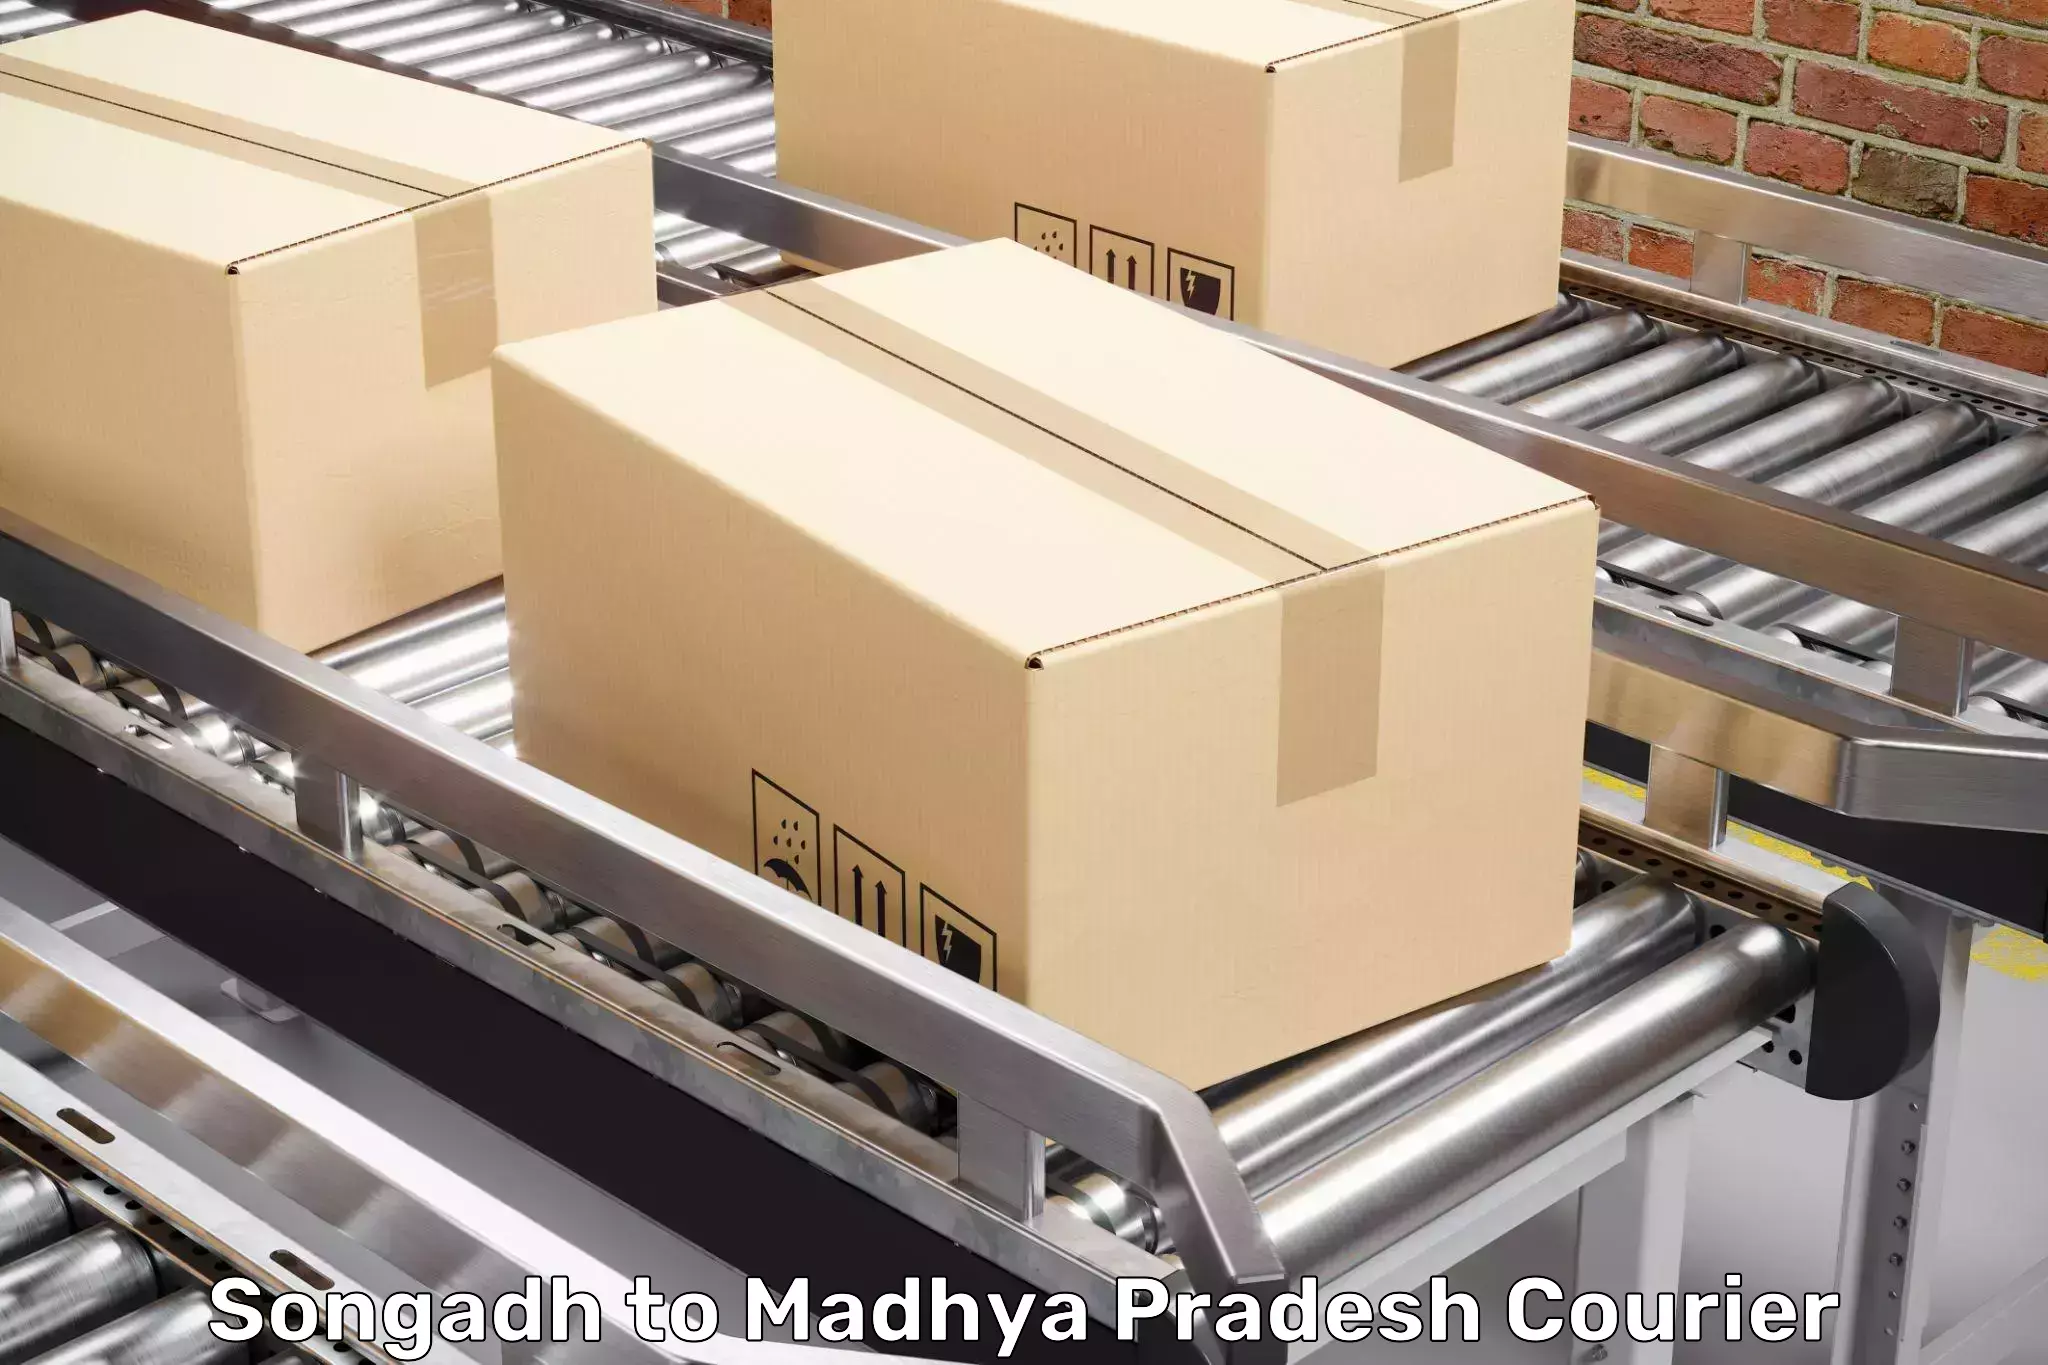 Quality relocation services Songadh to IIT Indore